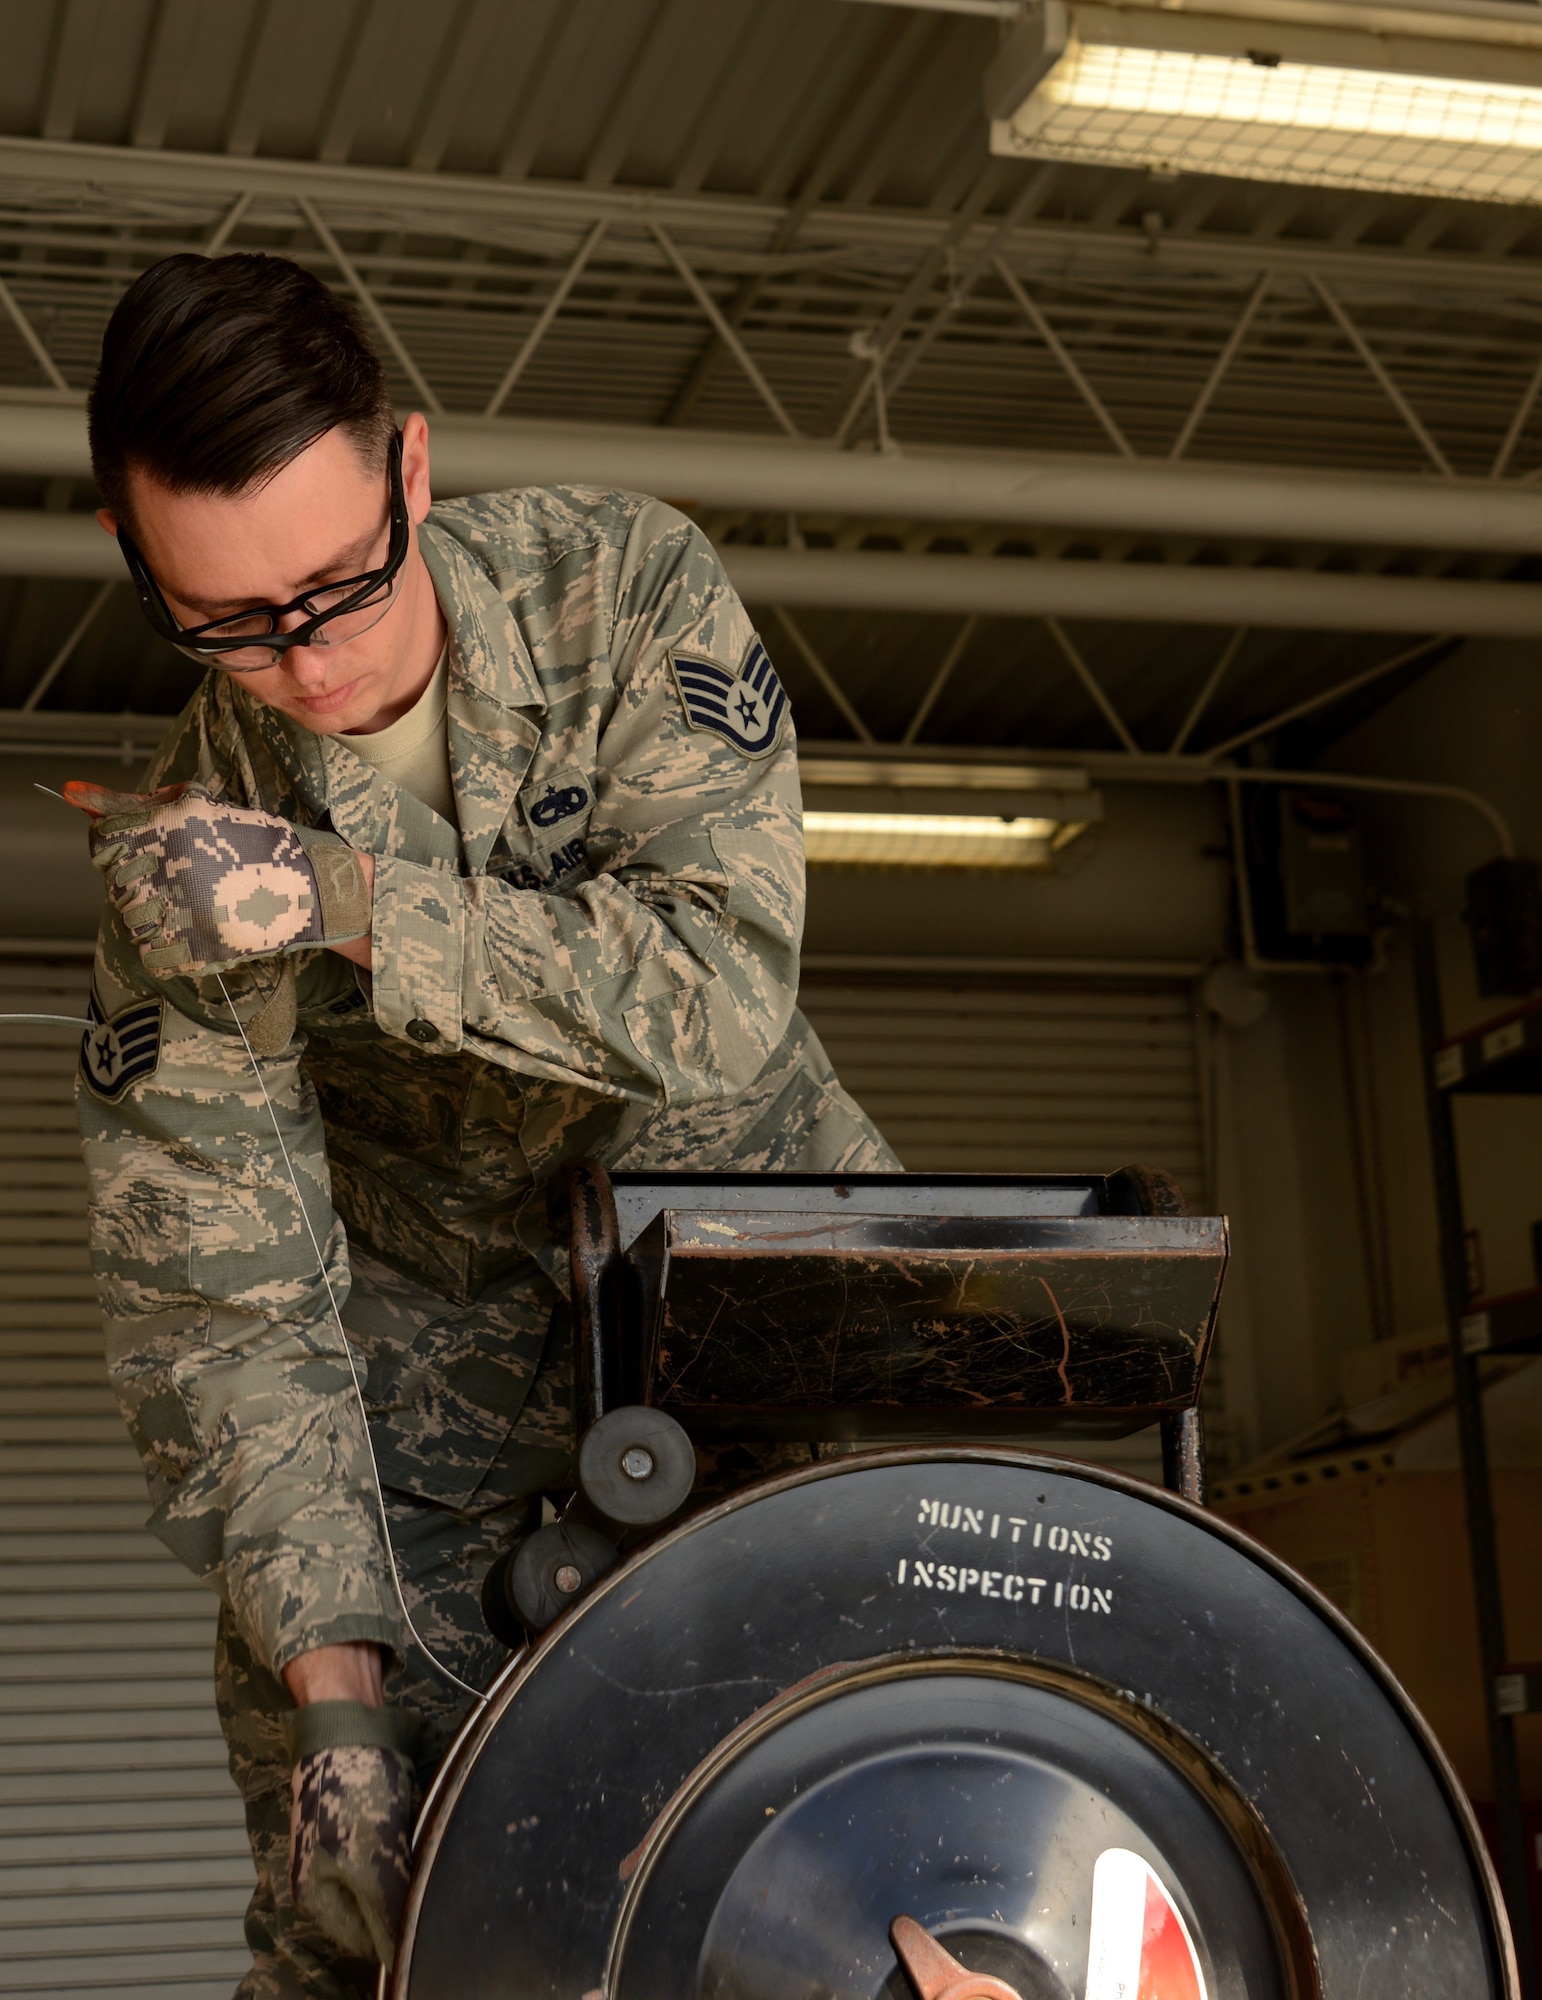 U.S. Air Force Staff Sgt. Ralph Simons, 20th Equipment Maintenance Squadron munitions inspector, measures metal banding at Shaw Air Force Base, S.C., Feb. 6, 2017. The metal banding is used to secure crates of packed munitions following inspection and before storage. (U.S. Air Force photo by Airman 1st Class Kathryn R.C. Reaves)